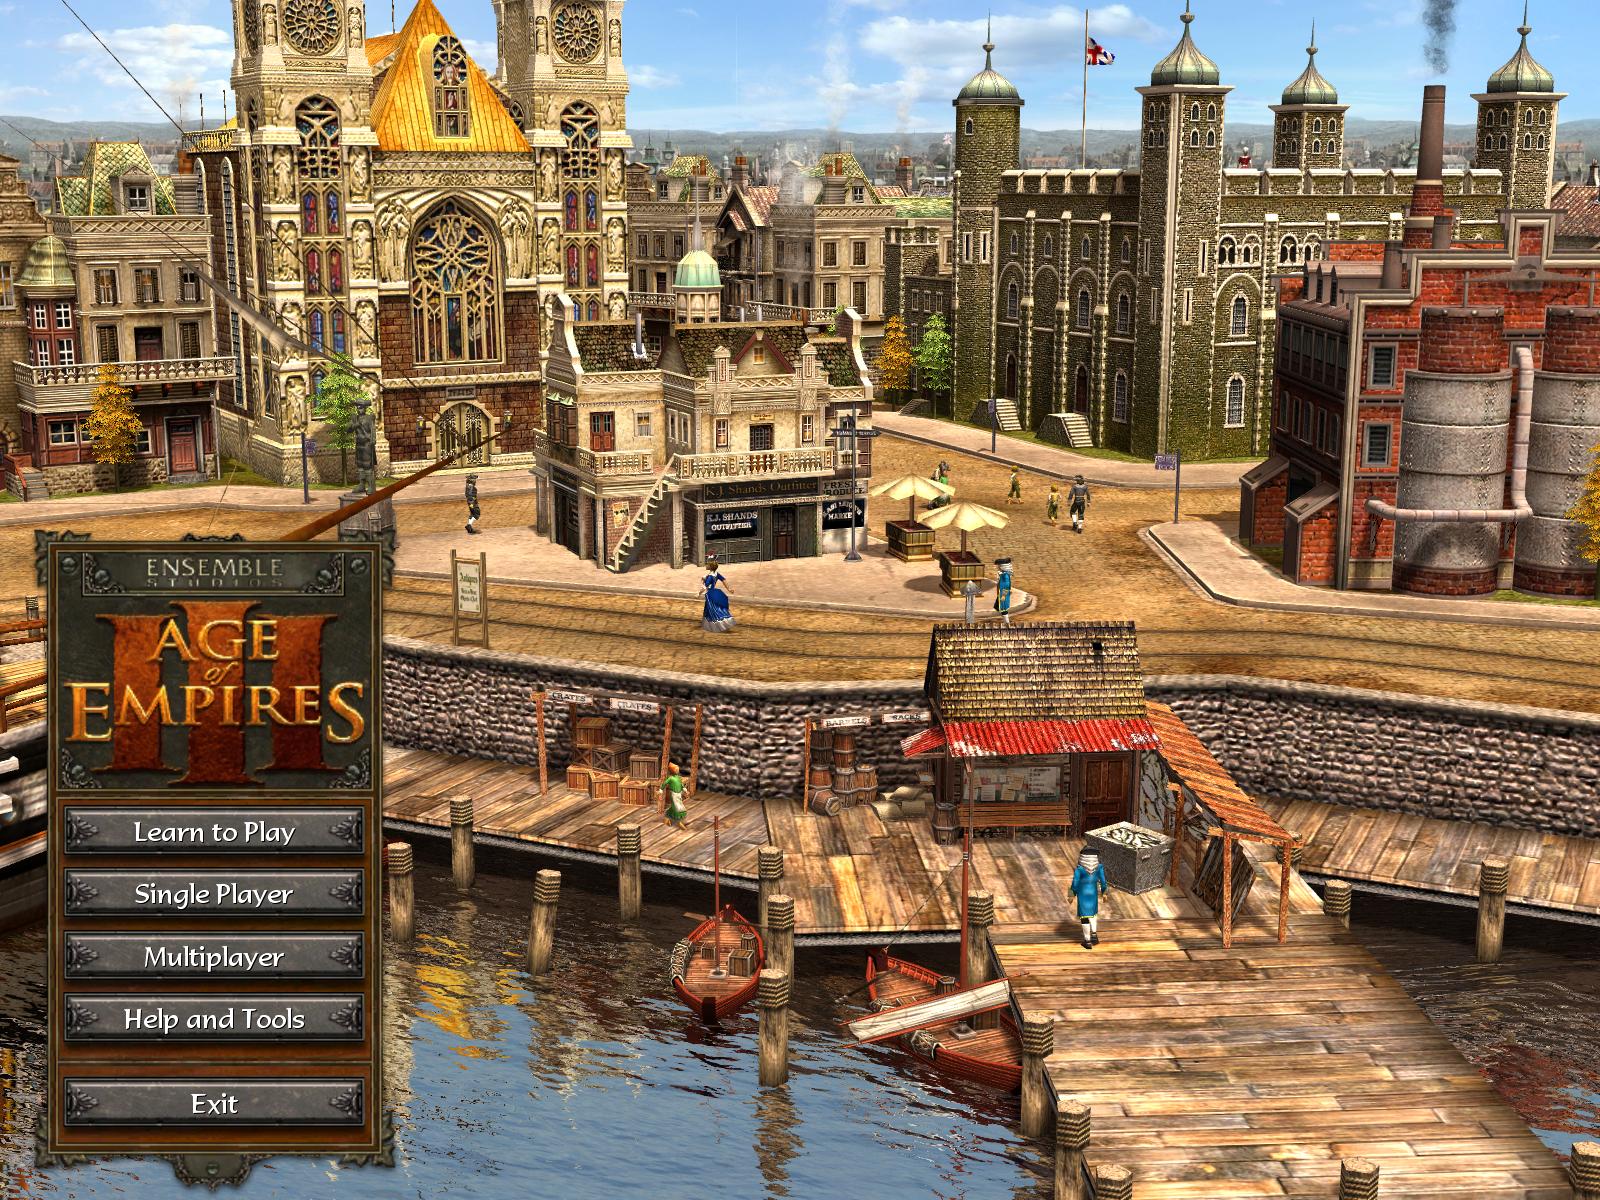 age of empires 3 home city file location